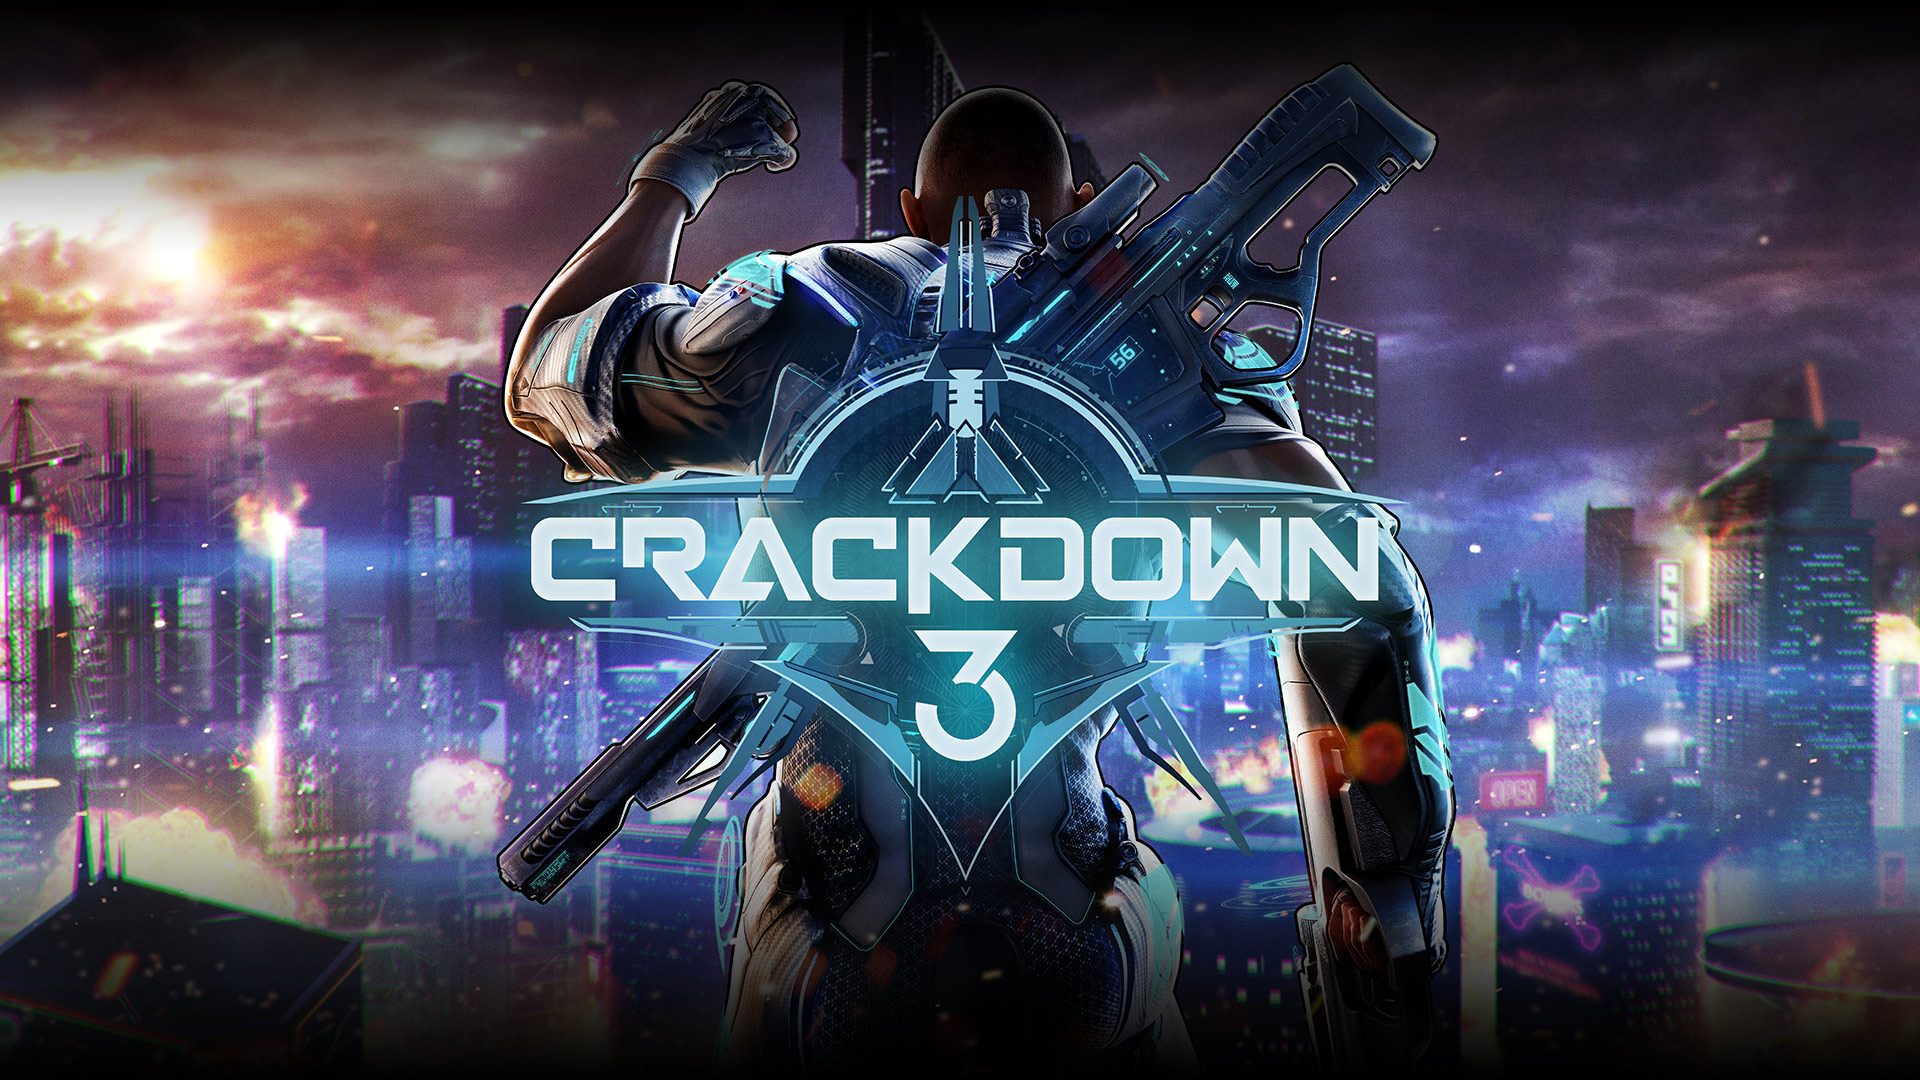 Crackdown 3 multiplayer test starts tomorrow on Xbox One and PC